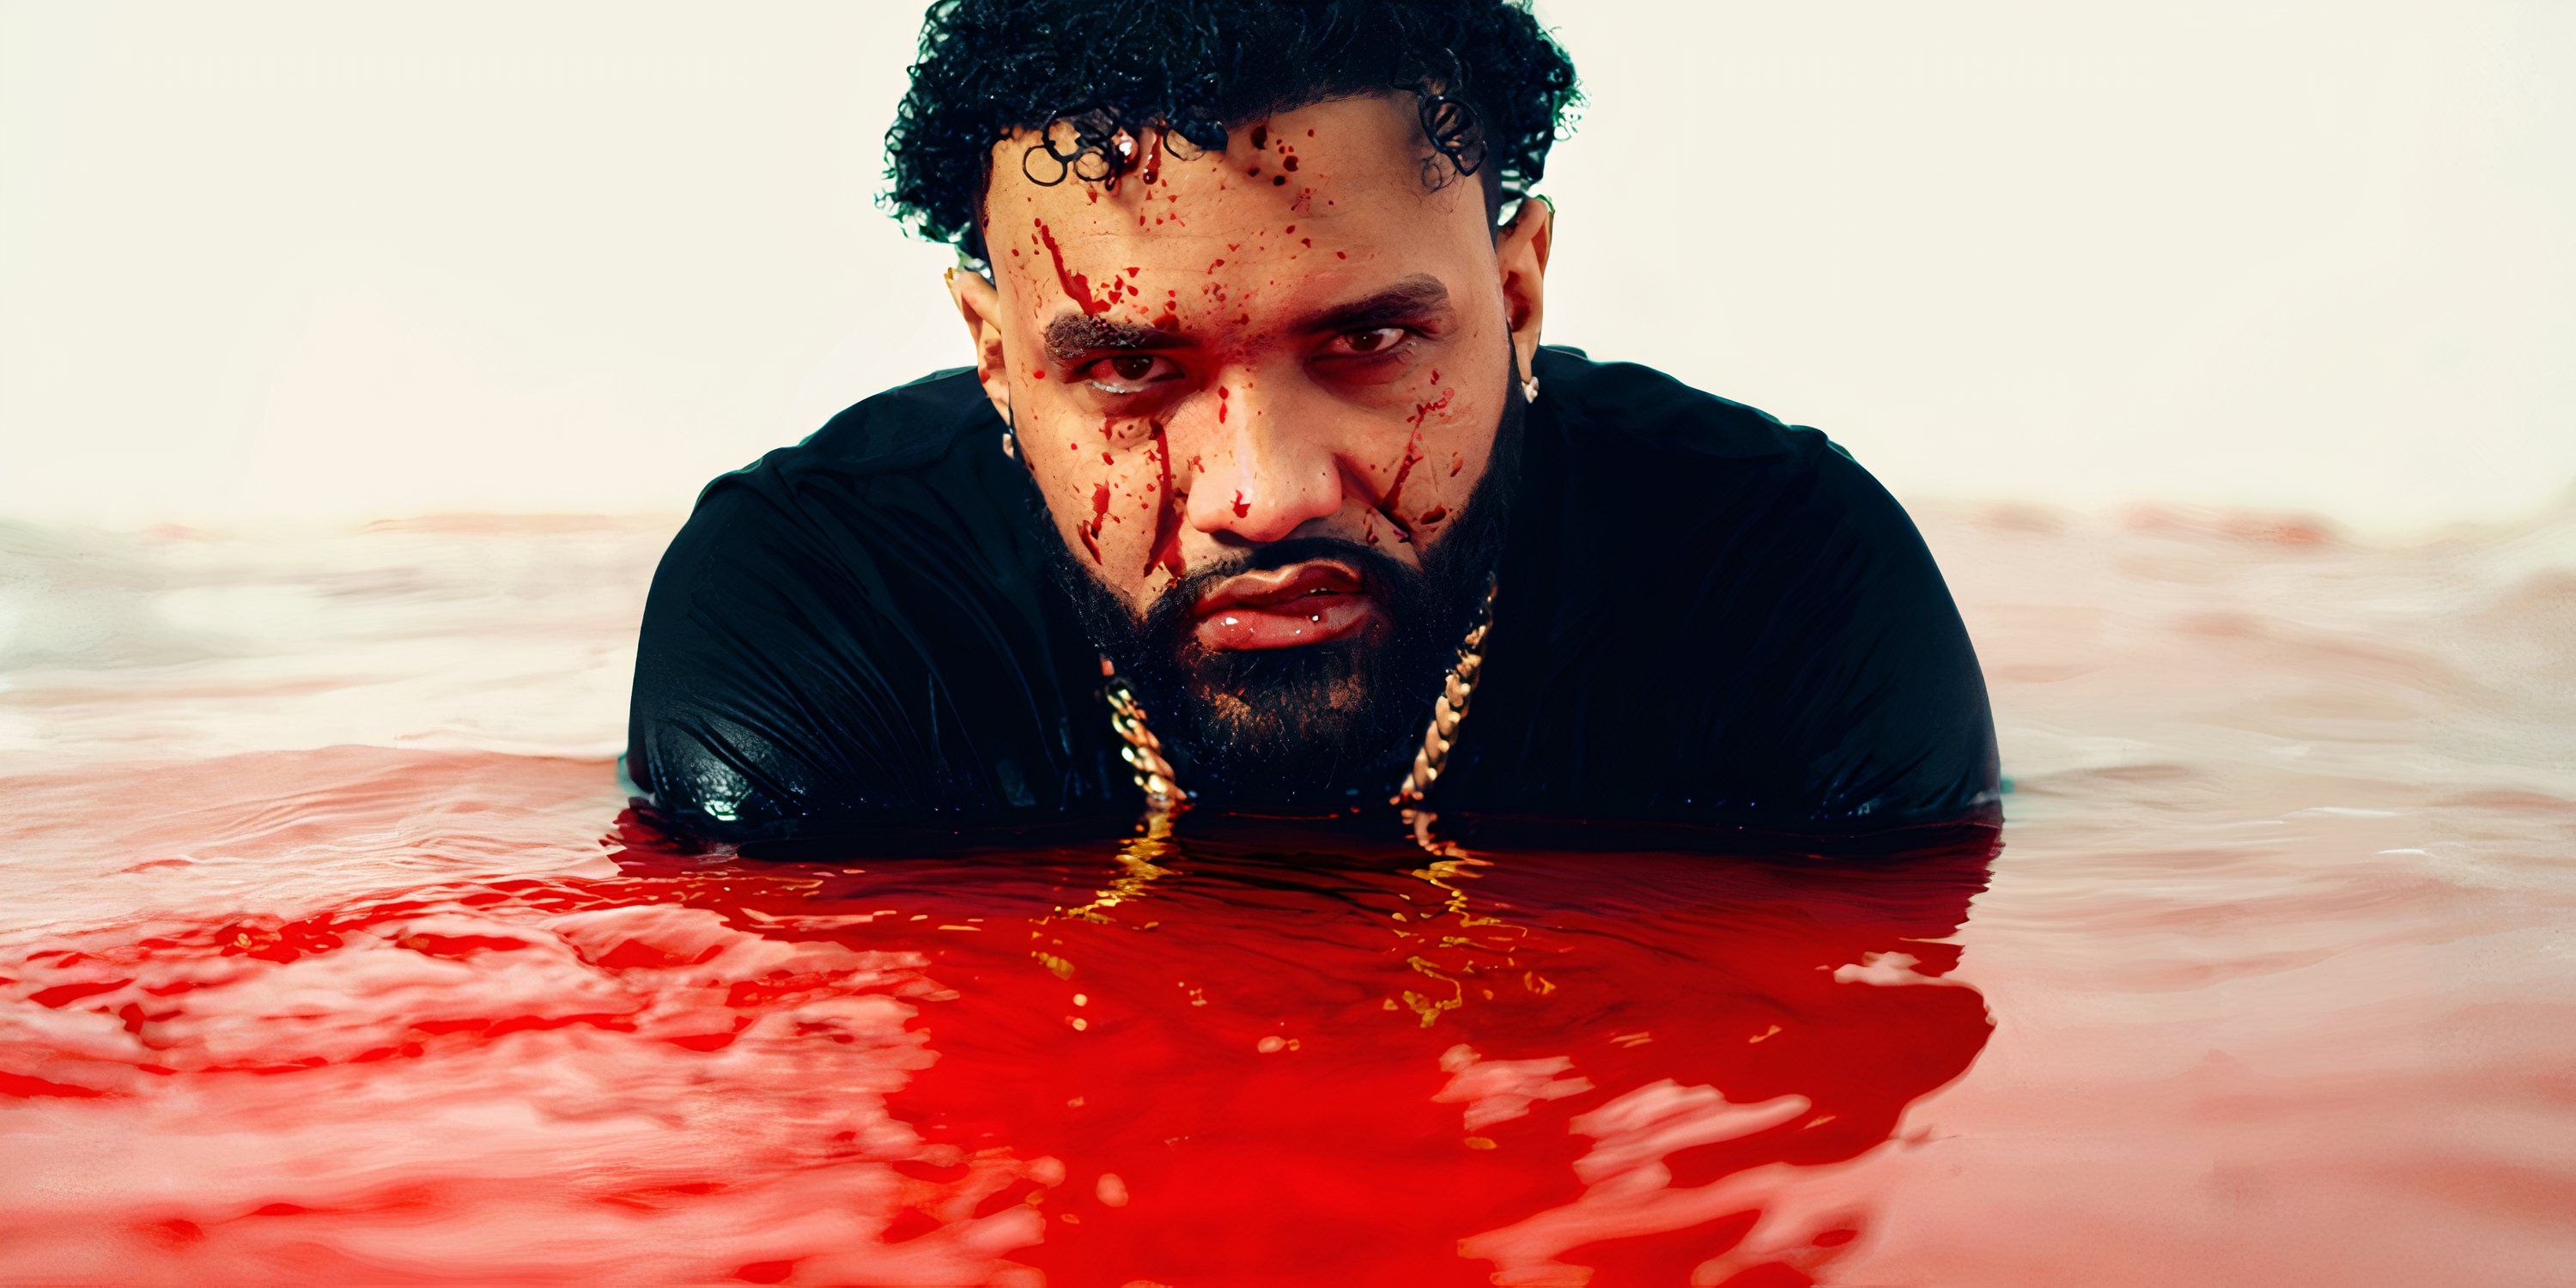 Joyner Lucas covered in blood whilst in water